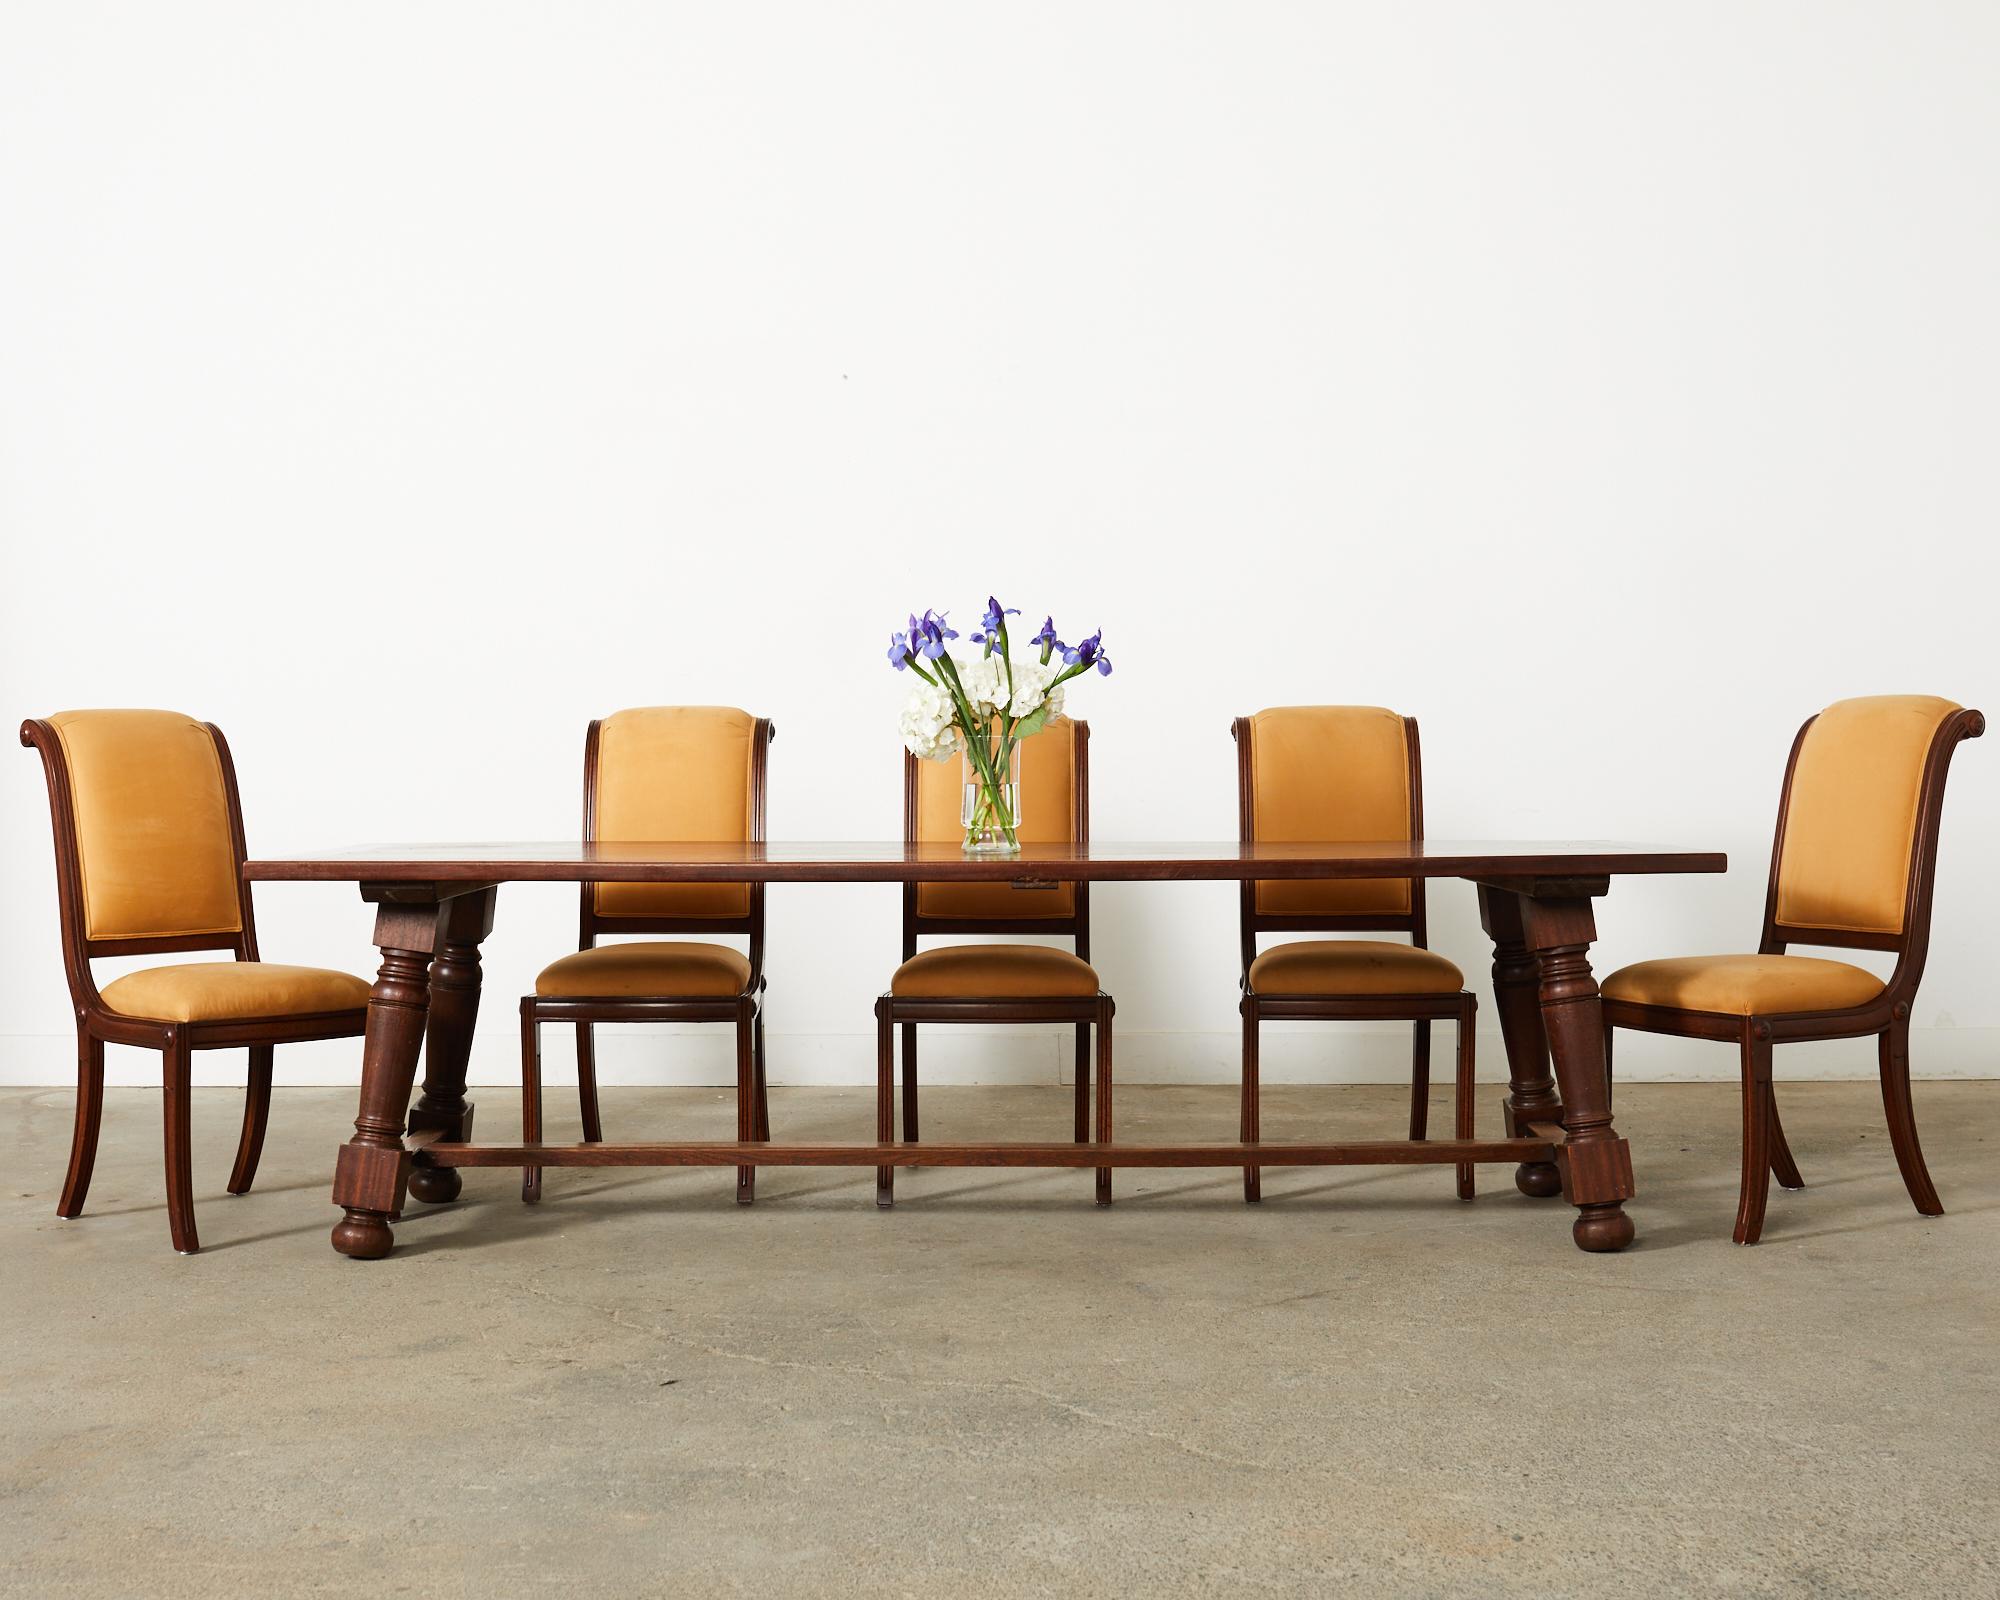 Distinctive set of twelve dining chairs crafted by Lily Jack in Gardena, CA. The set consists of all side chairs made in the English Regency taste. The frames feature a tall scrolled back with reeded sides. The generous seats are upholstered with a